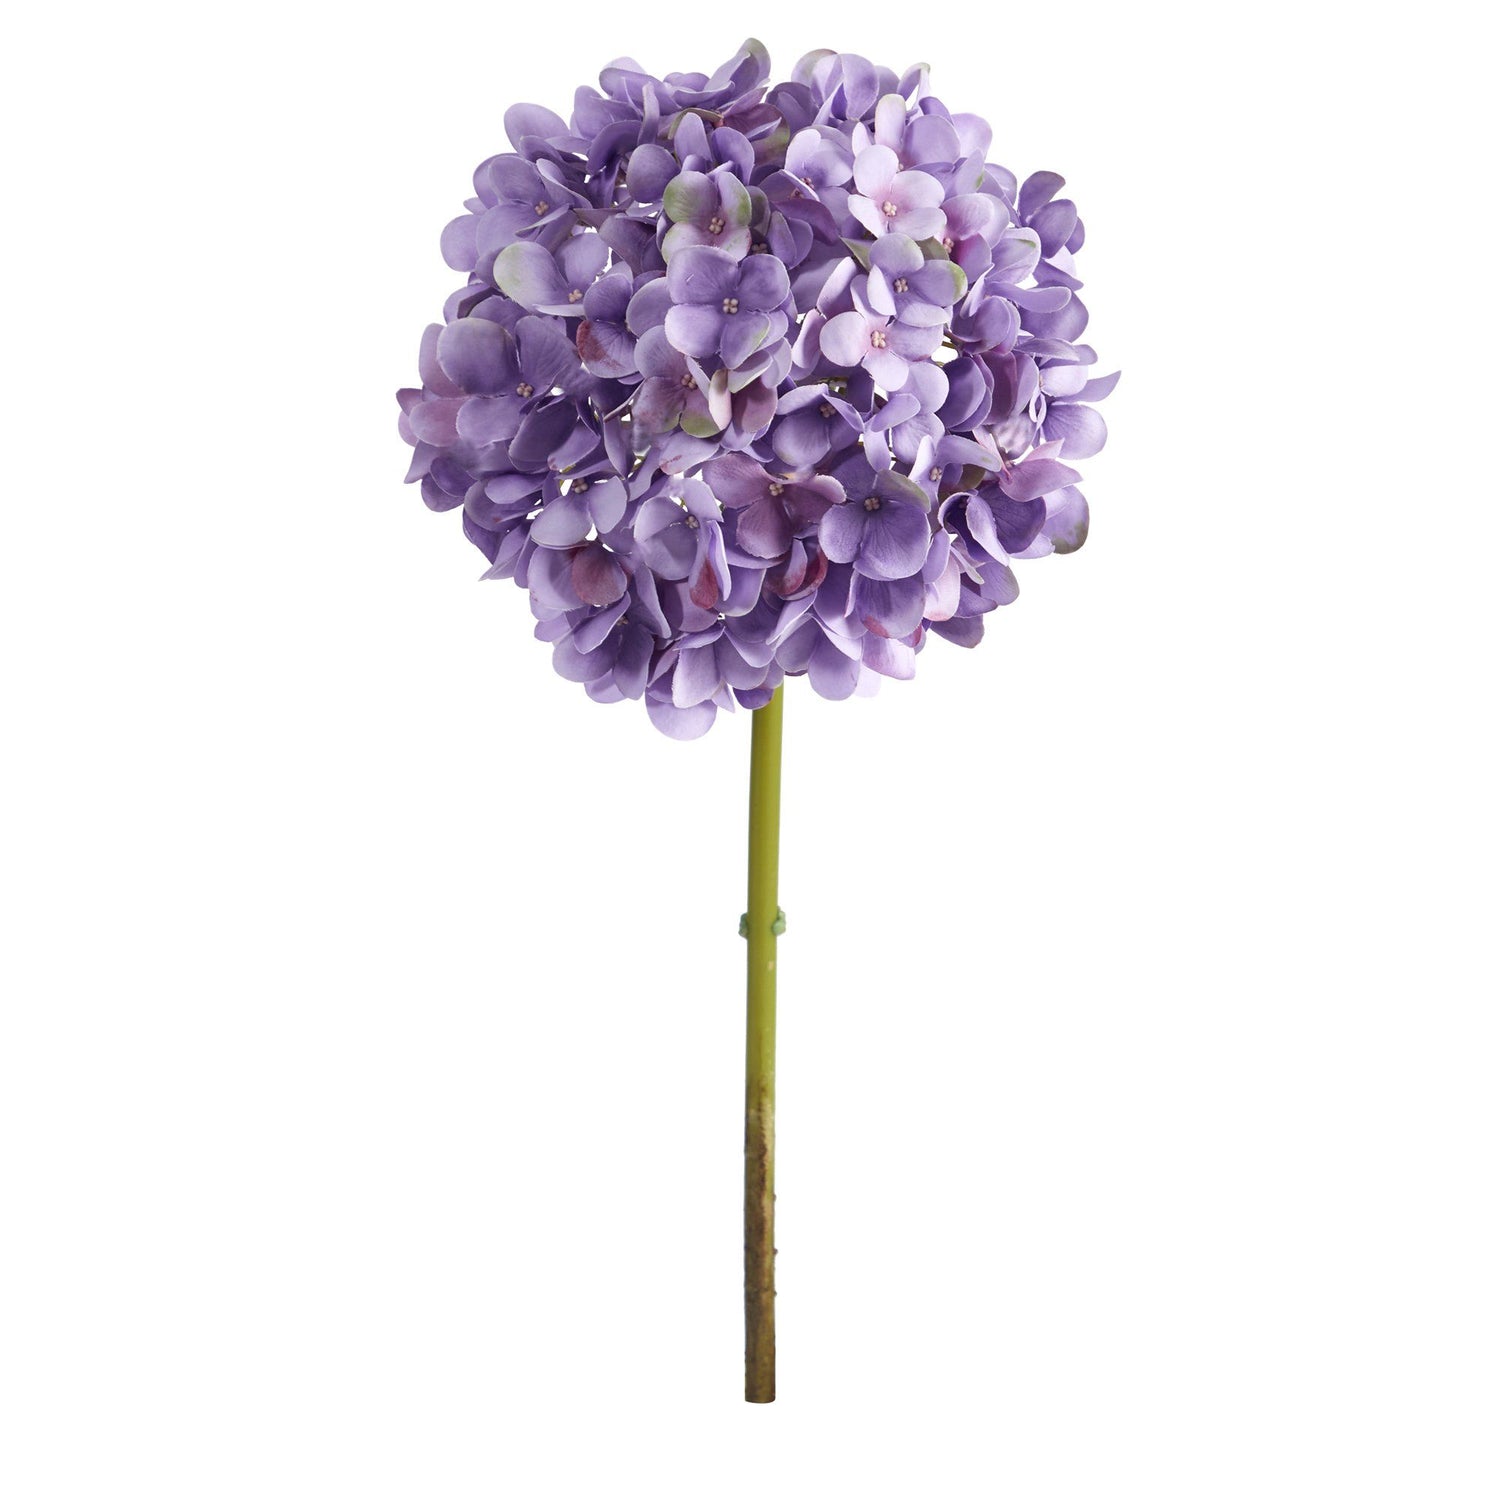 Jumbo Jet Black Hydrangea With or Without Stem Artificial Flowers